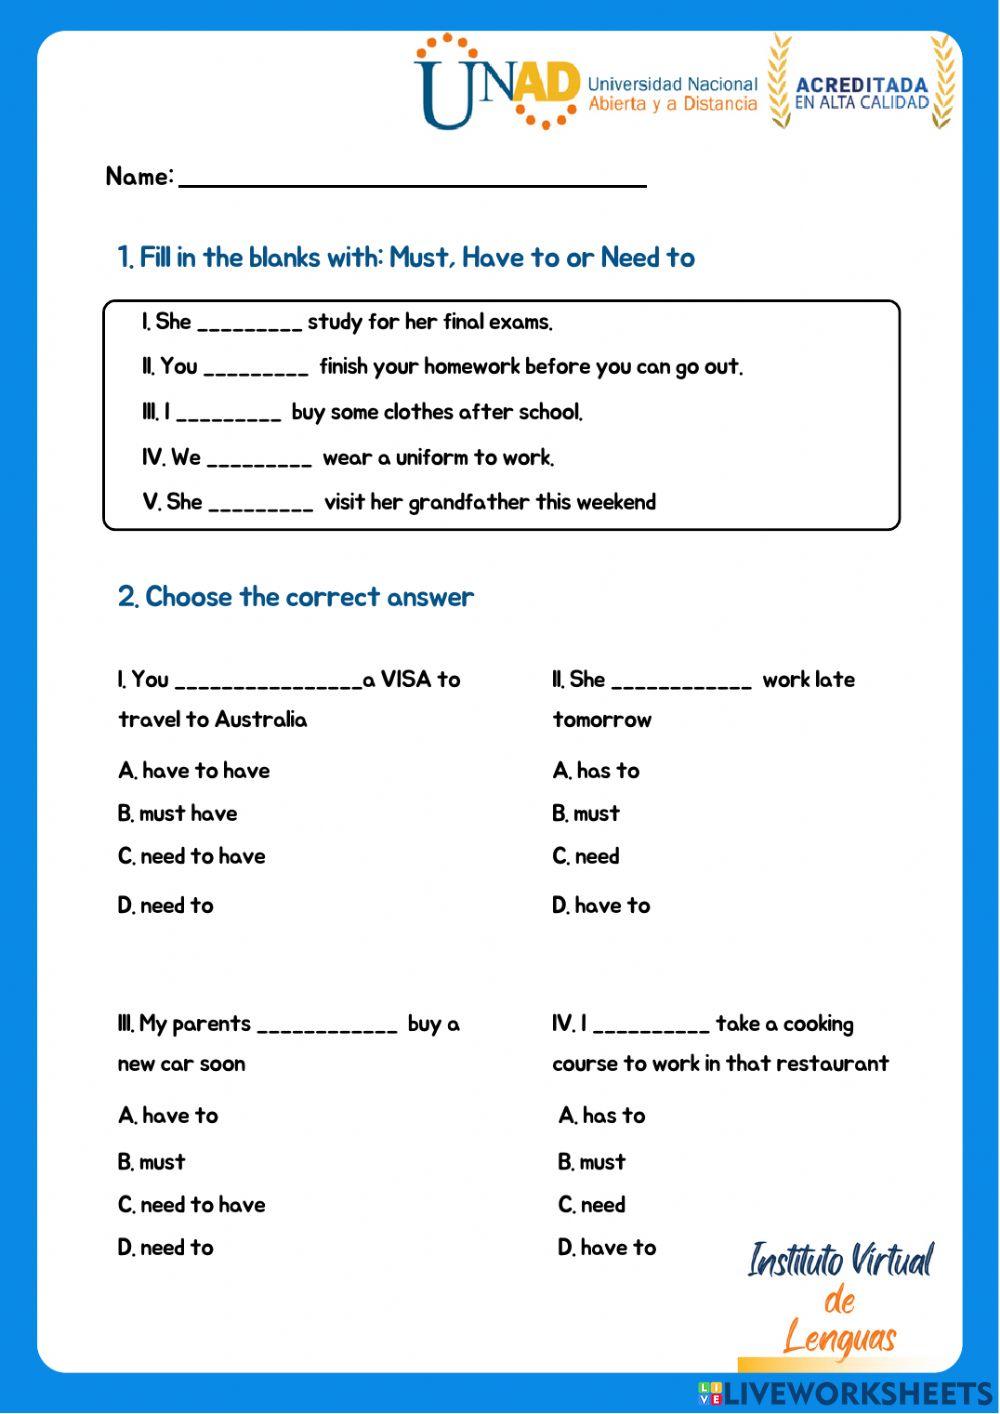 Modal verbs: must, have to, and need to